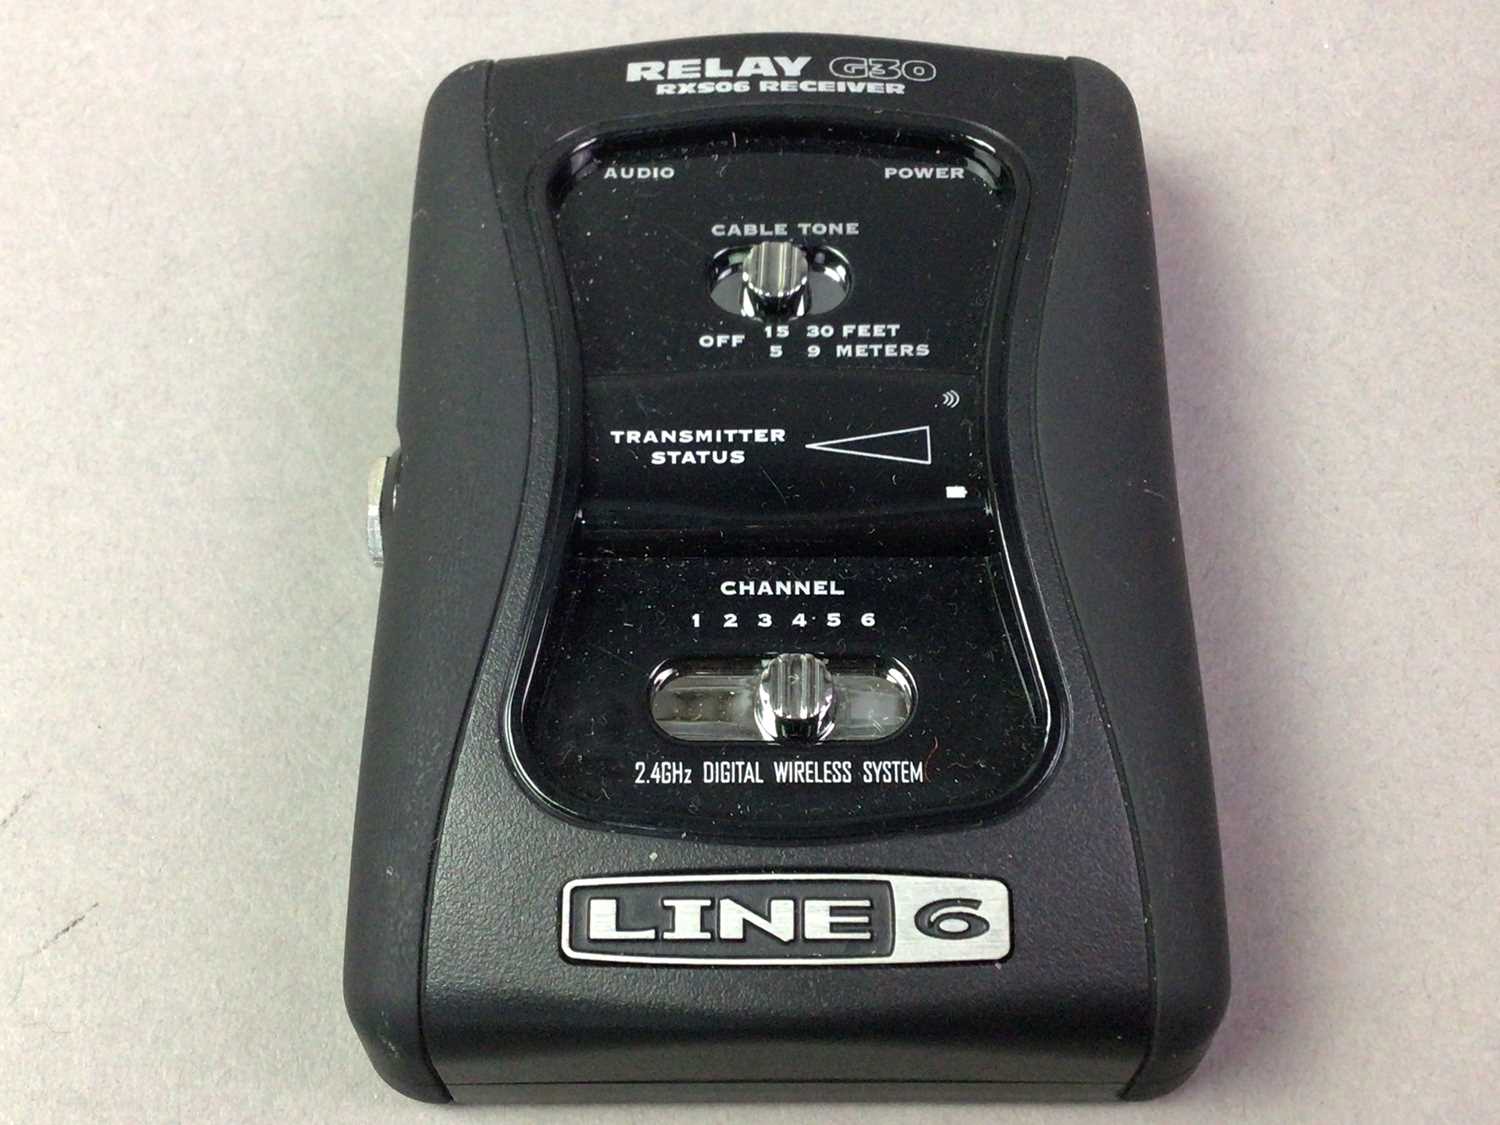 Lot 643 - LINE 6 RELAY G30 WIRELESS GUITAR SYSTEM